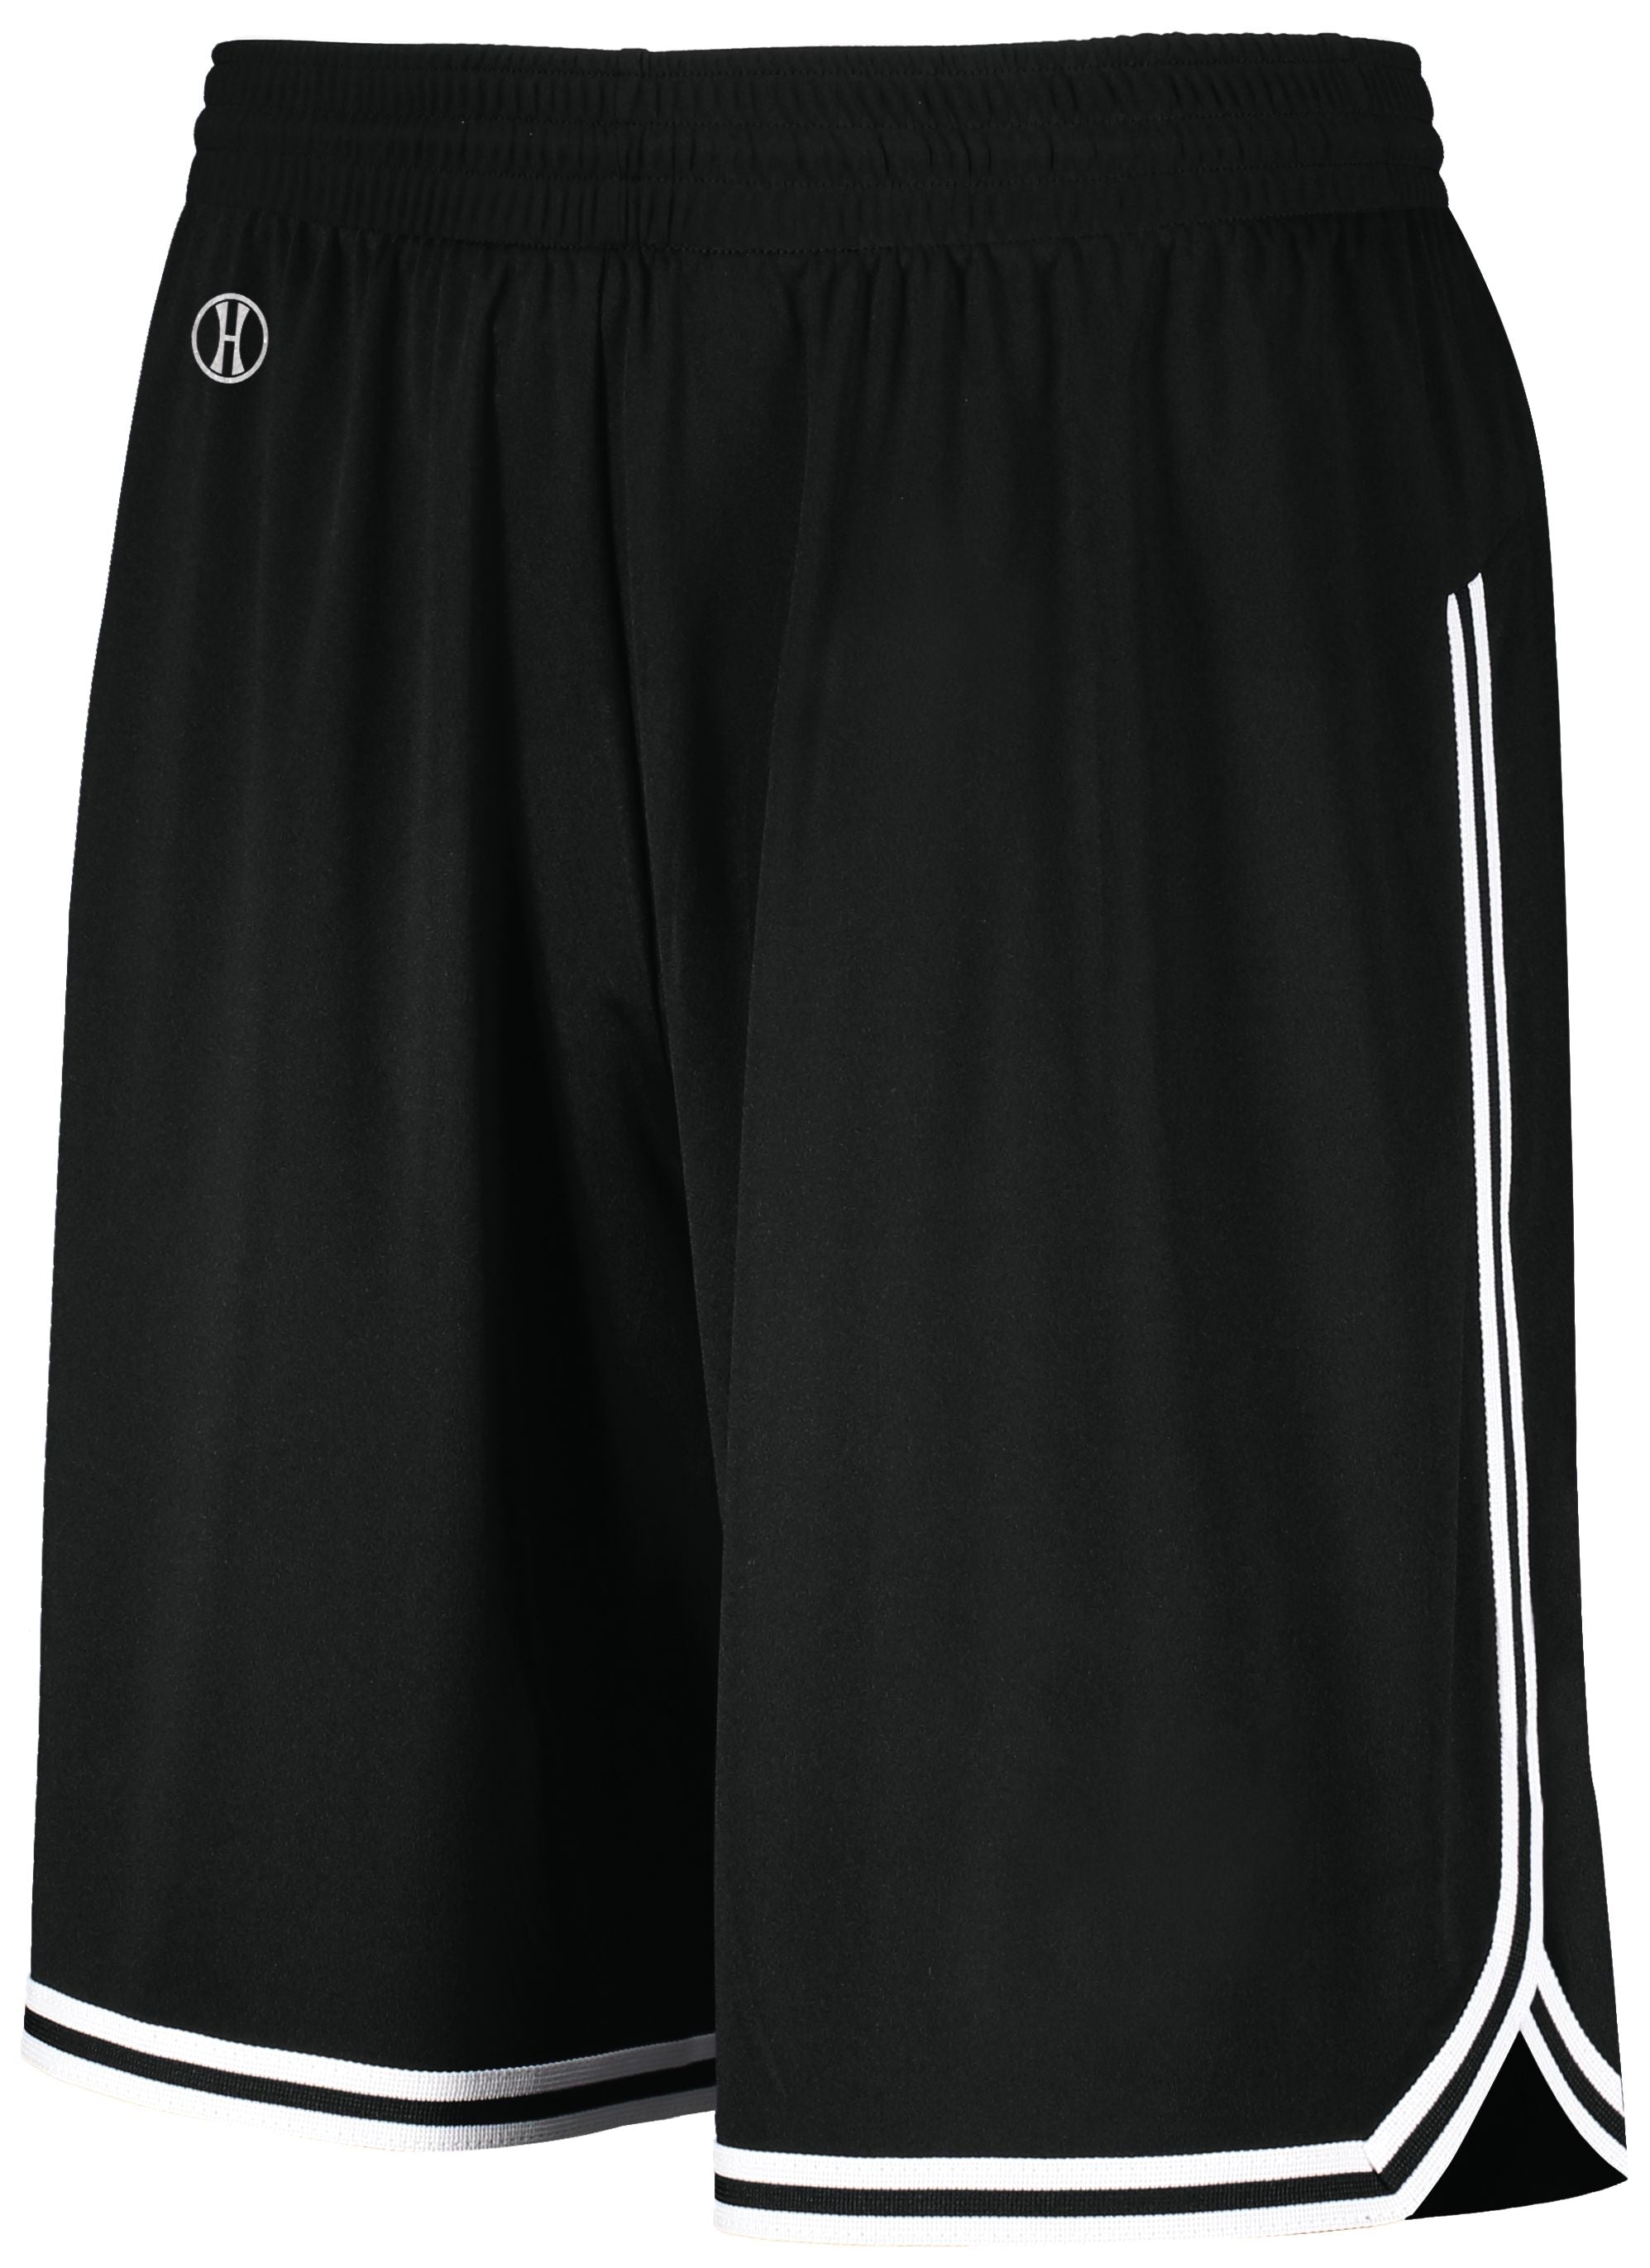 Holloway Retro Basketball Shorts in Black/White  -Part of the Adult, Adult-Shorts, Basketball, Holloway, All-Sports, All-Sports-1 product lines at KanaleyCreations.com